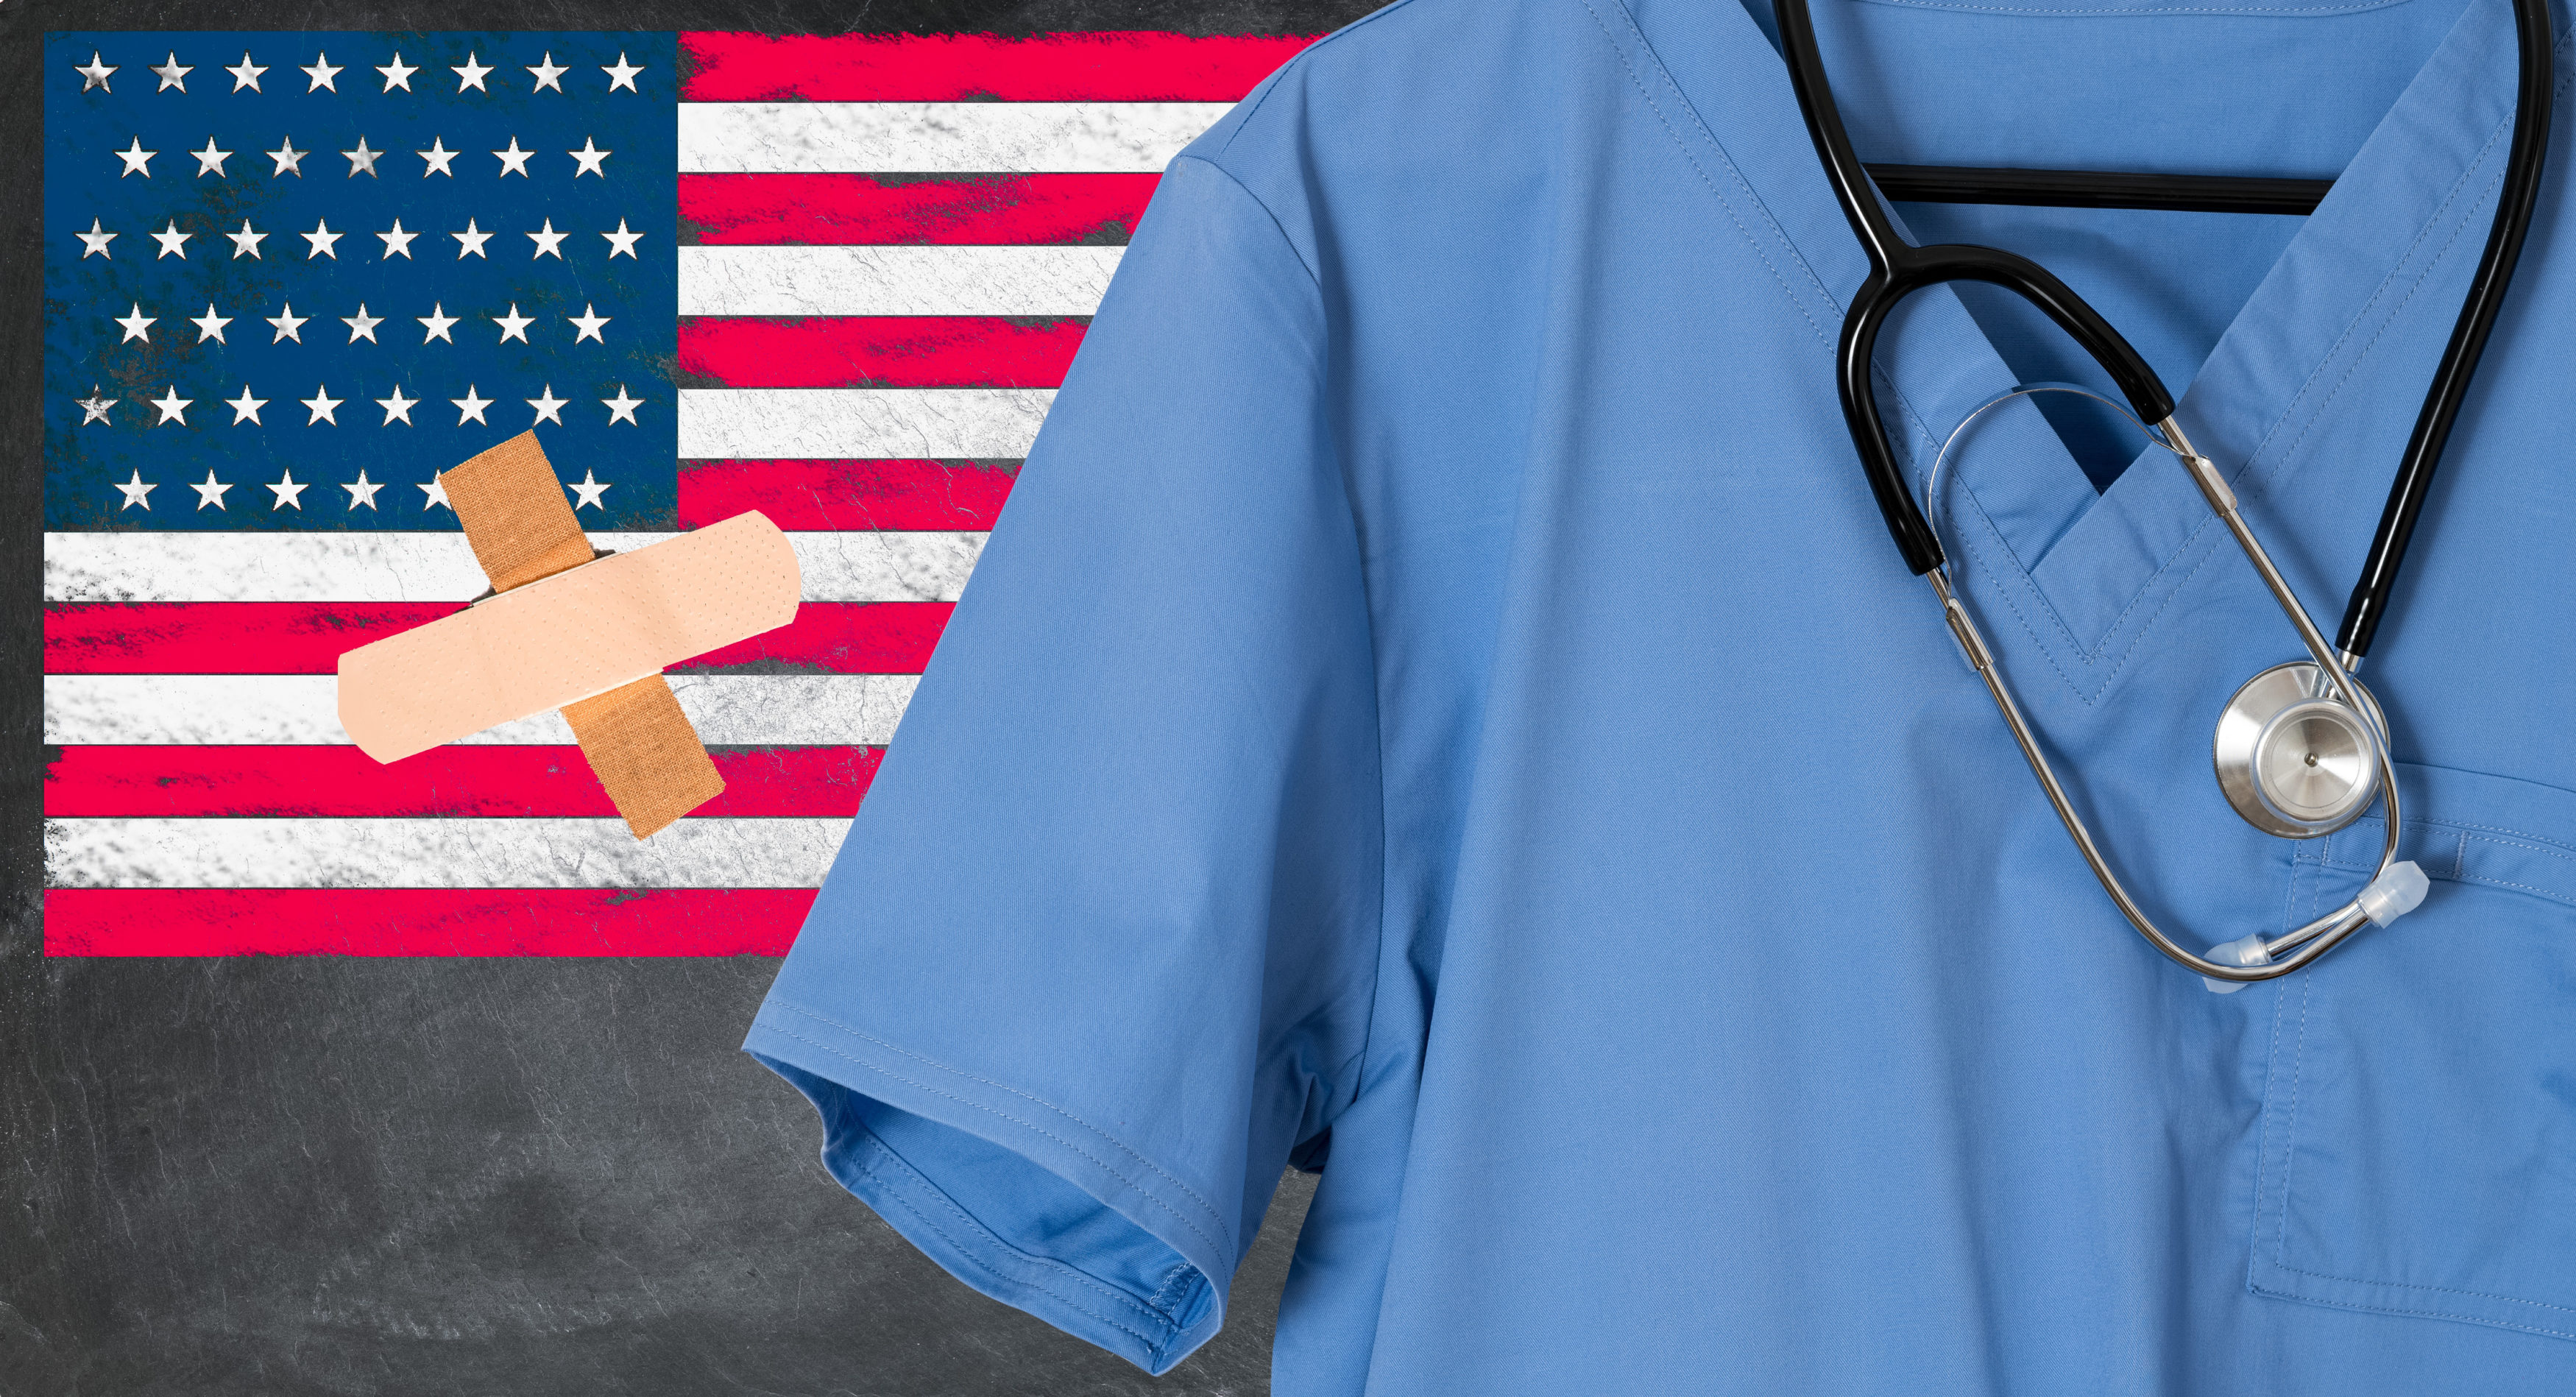 Blue scrubs with USA flag for healthcare issues